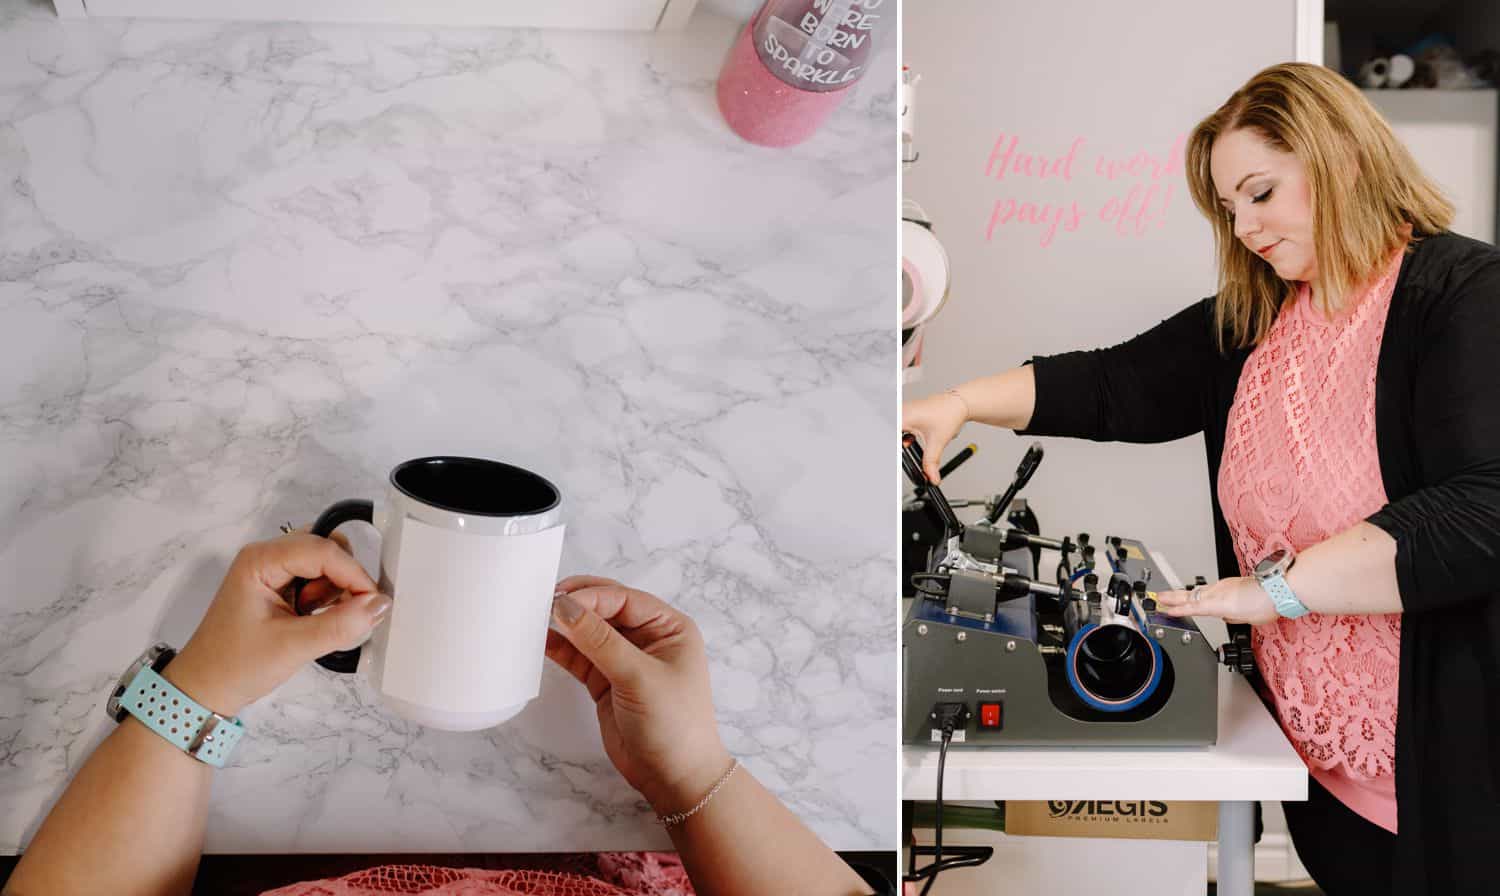 a label is being applied to a coffee mug, pictured beside a woman operating a typesetter